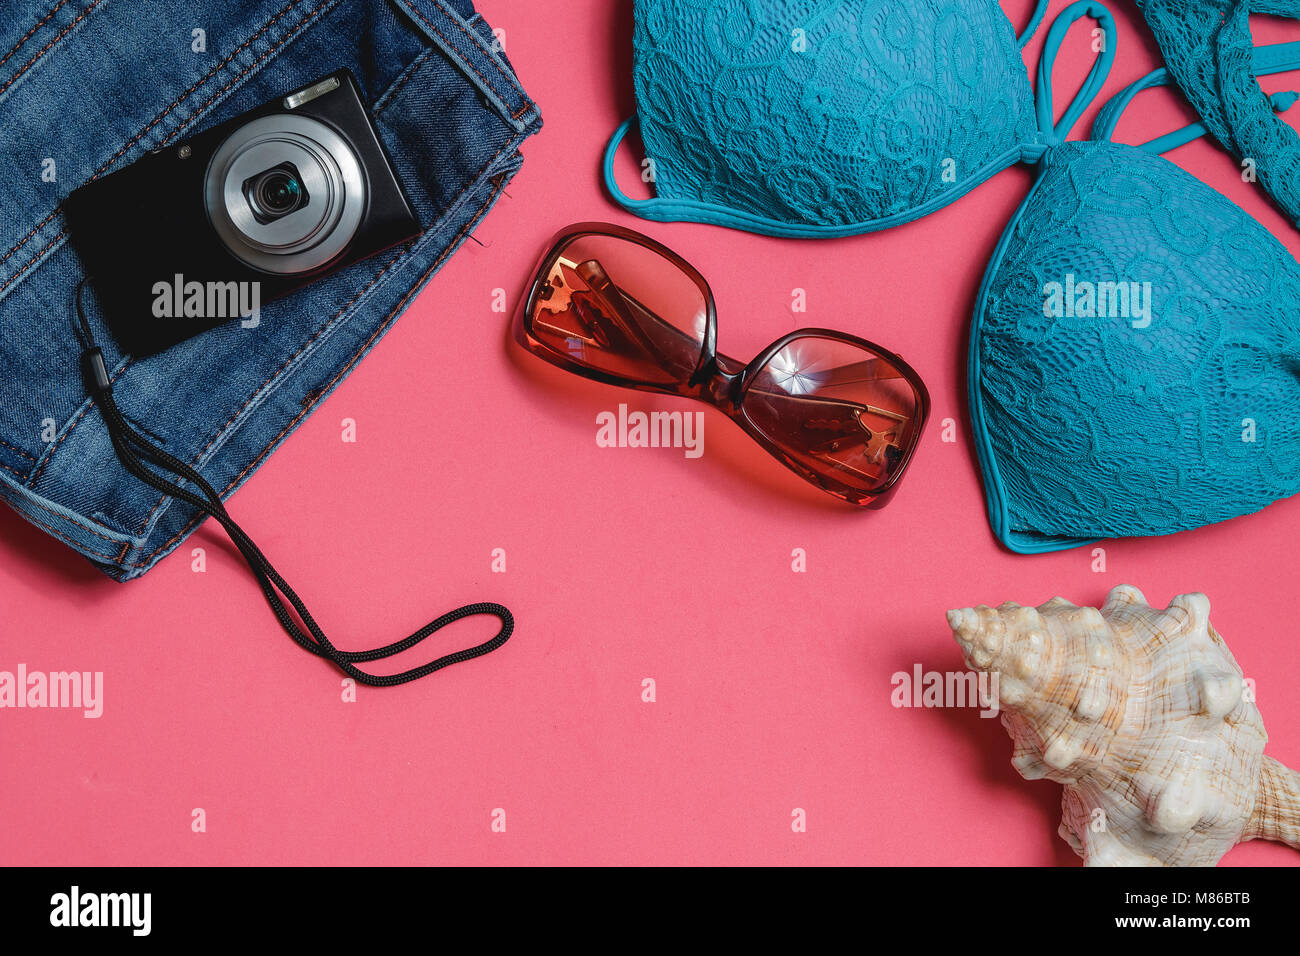 Swimsuit, Jeans, Sunglasses, Photo Camera, Seashell on Pink Background. Top View Travel Concept with Copyspace. Stock Photo